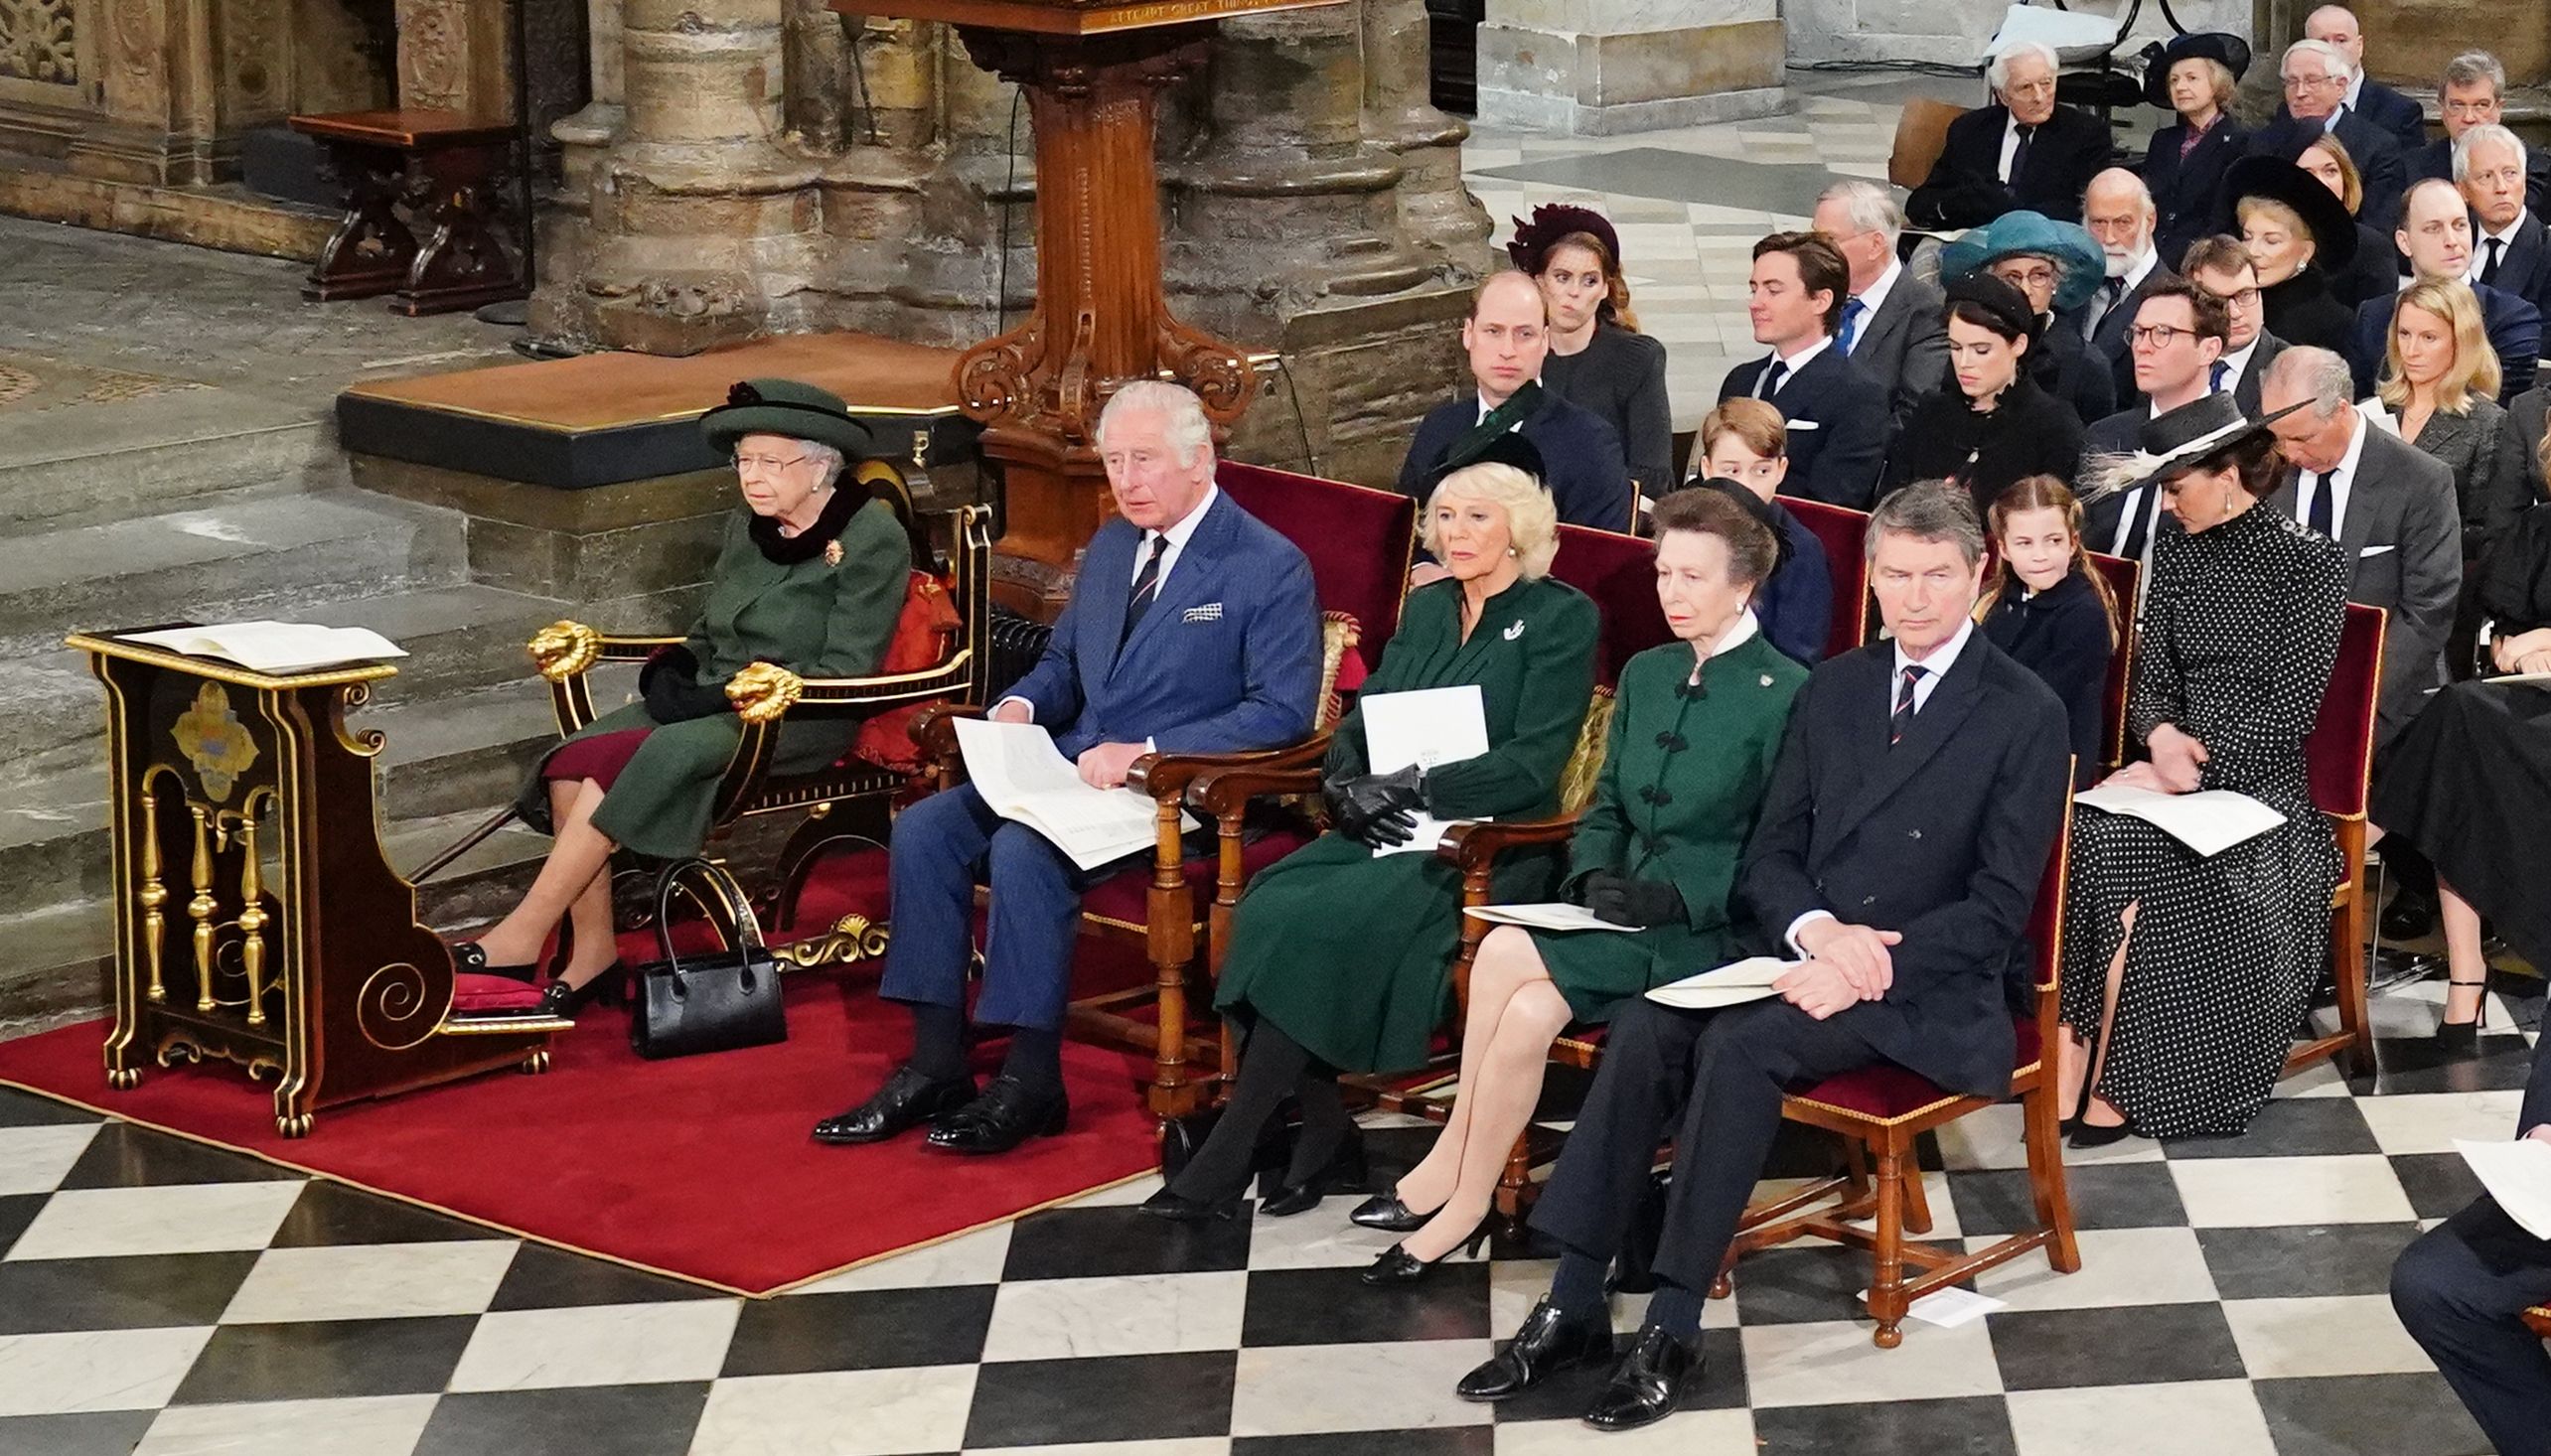 The Queen and members of the Royal Family attended the recent service of thanksgiving for Philip\u2019s life. (Front row left to right) Queen Elizabeth II, the Prince of Wales and the Duchess of Cornwall, the Princess Royal, Vice Admiral Sir Tim Laurence. (second row left to right) The Duke of Cambridge, Prince George, Princess Charlotte, the Duchess of Cambridge. Picture date: Tuesday March 29, 2022.